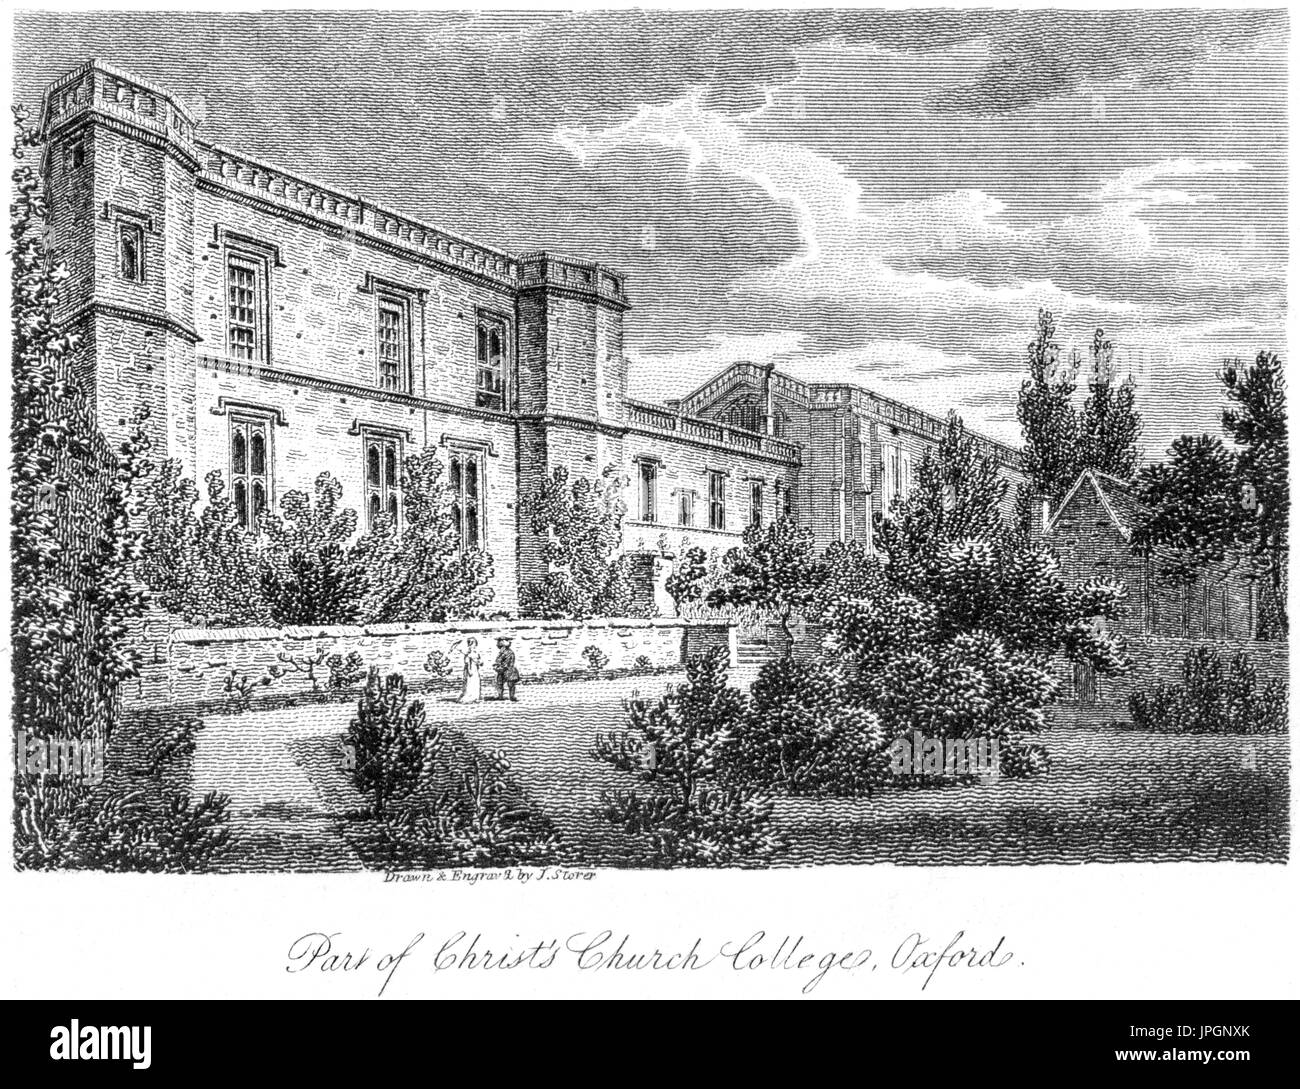 An engraving of a Part of Christ's (Christ) Church College, Oxford scanned at high resolution from a book printed in 1808.  Believed copyright free. Stock Photo